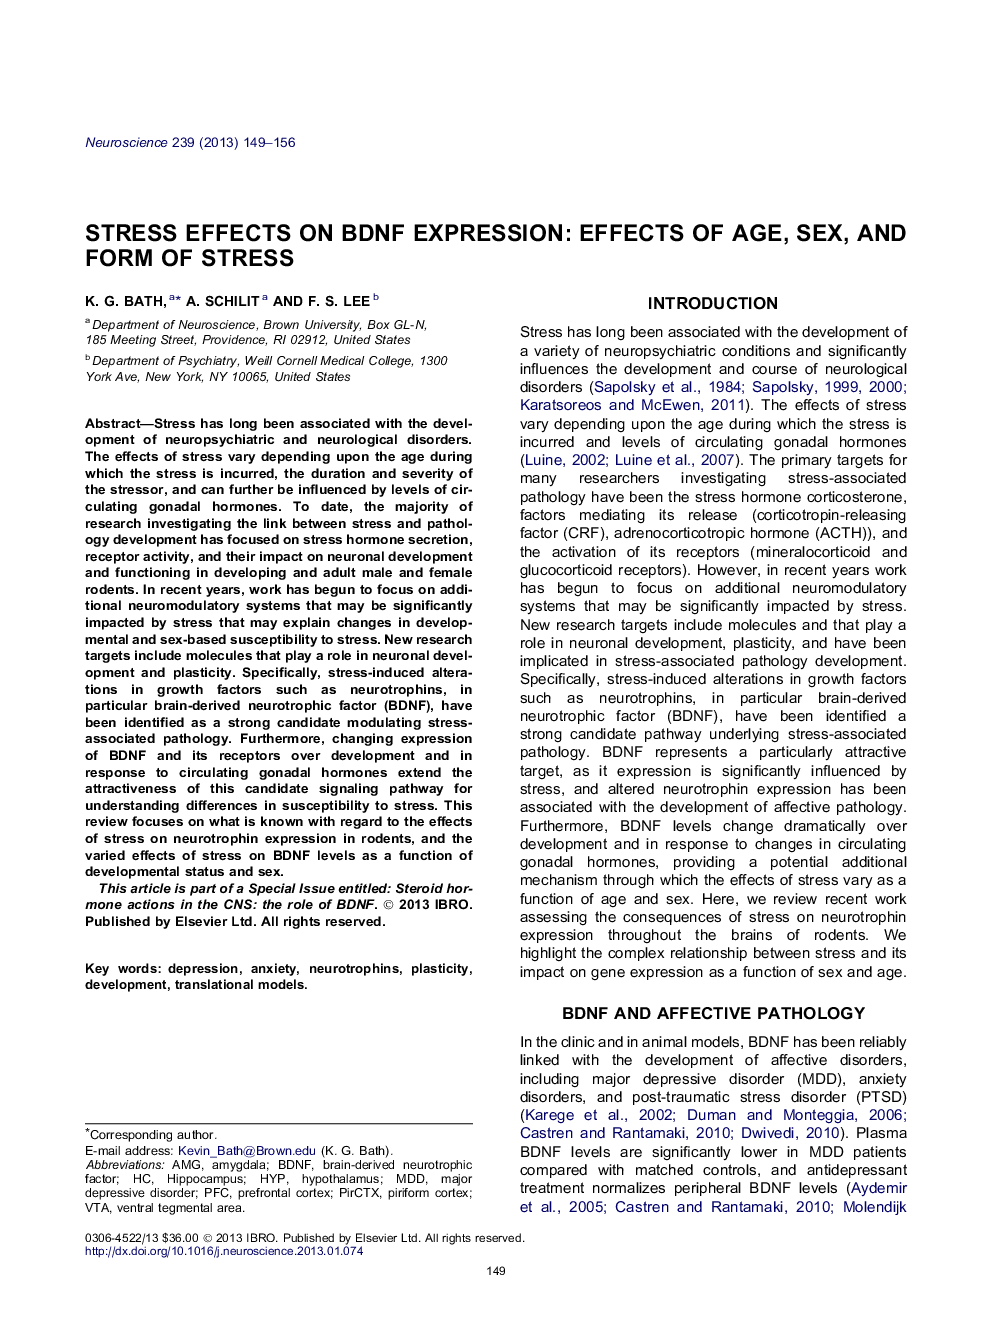 Stress effects on BDNF expression: Effects of age, sex, and form of stress